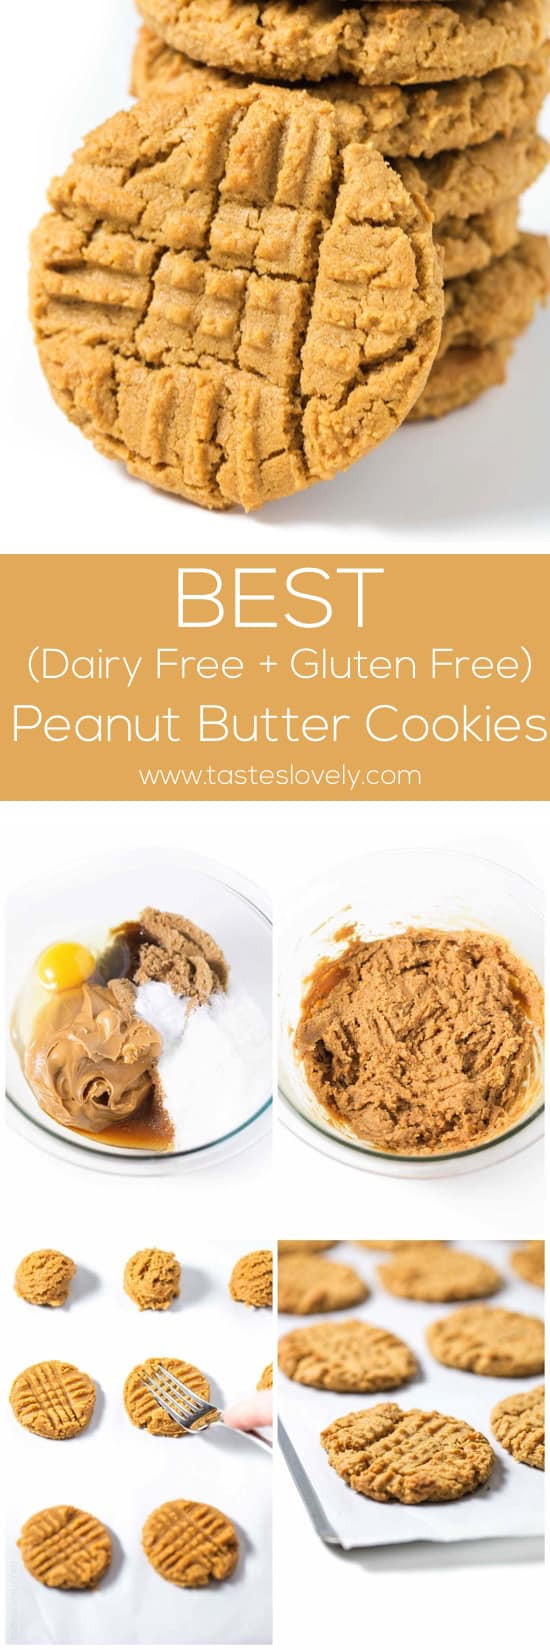 Dairy Free Peanut Butter Cookies
 Dairy Free Peanut Butter Cookies Tastes Lovely